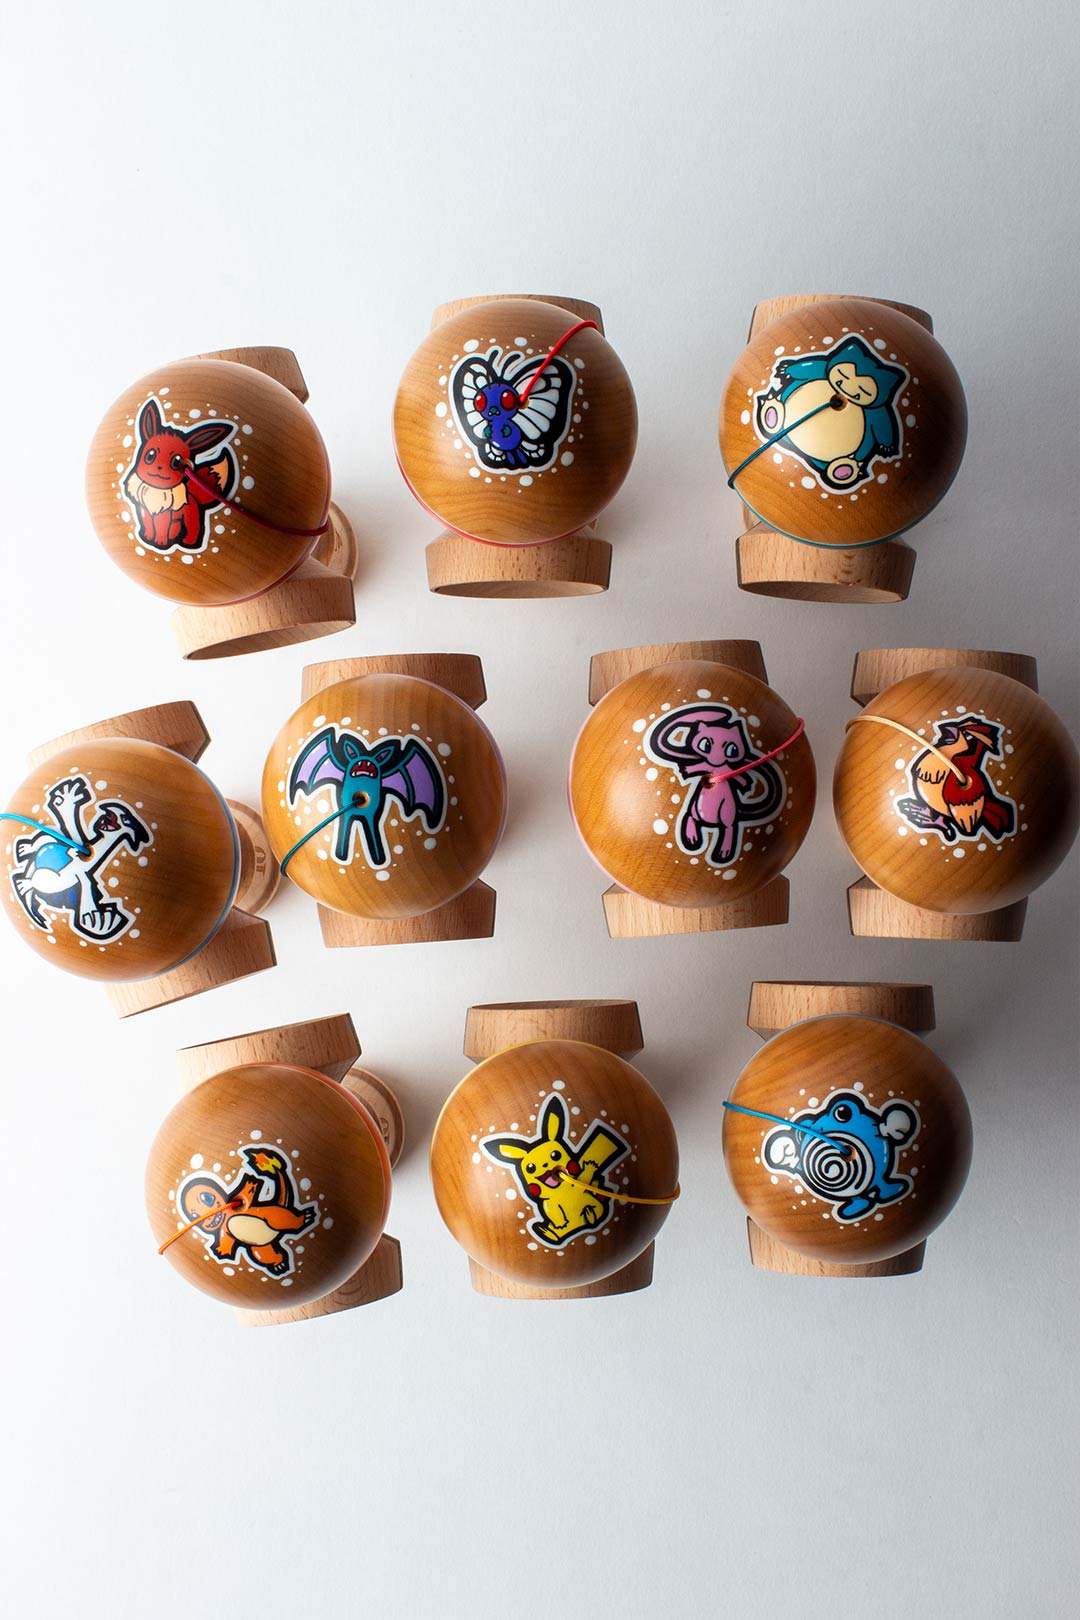 Forest Fire Customs x Sweets Kendamas - Monsters